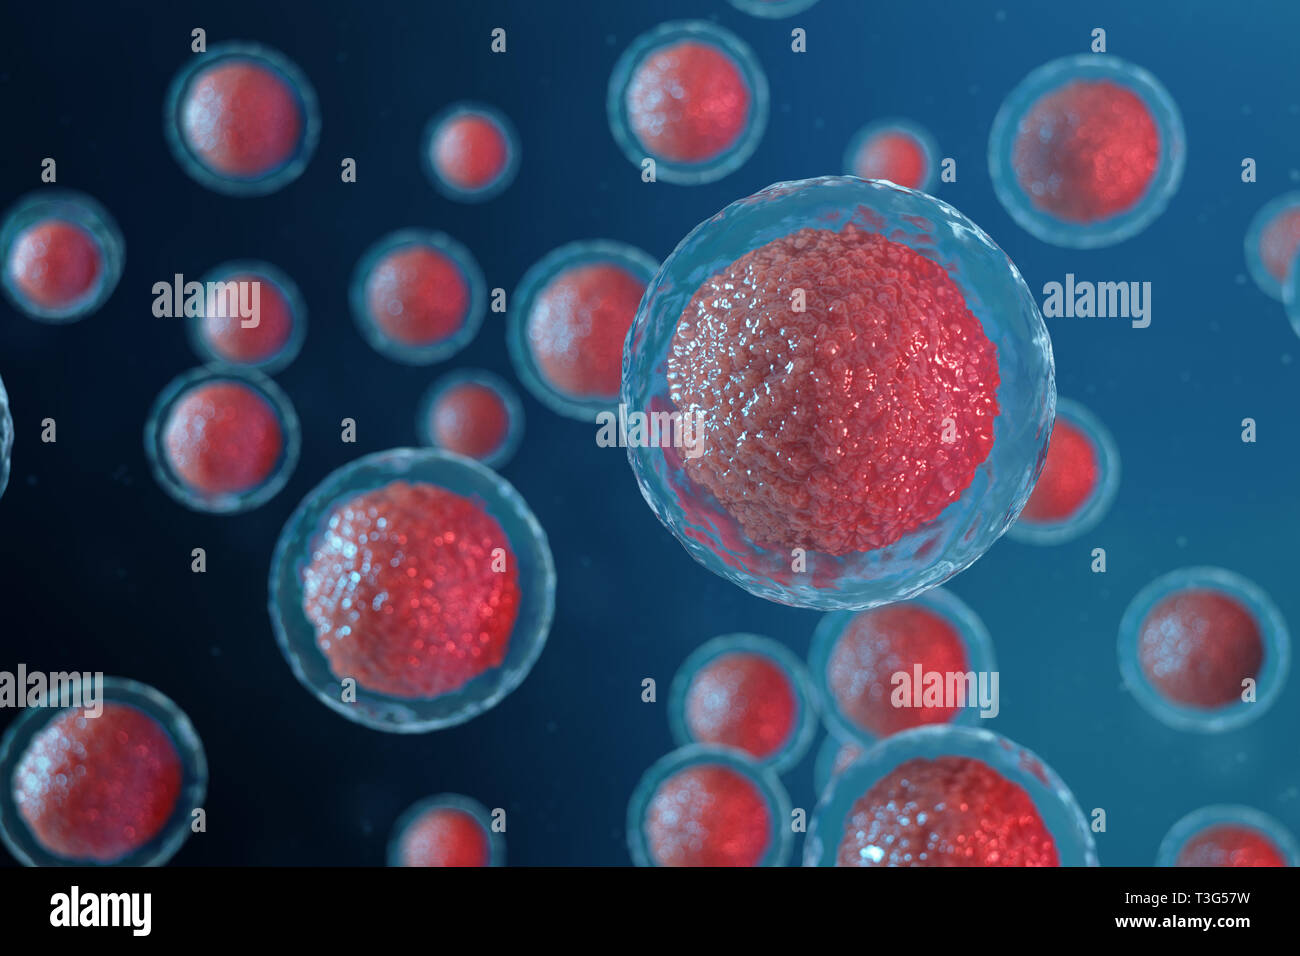 3D illustration egg cells embryo. Embryo cells with red nucleus in center. Human or animal egg cells. Medicine scientific concept. Development living  Stock Photo